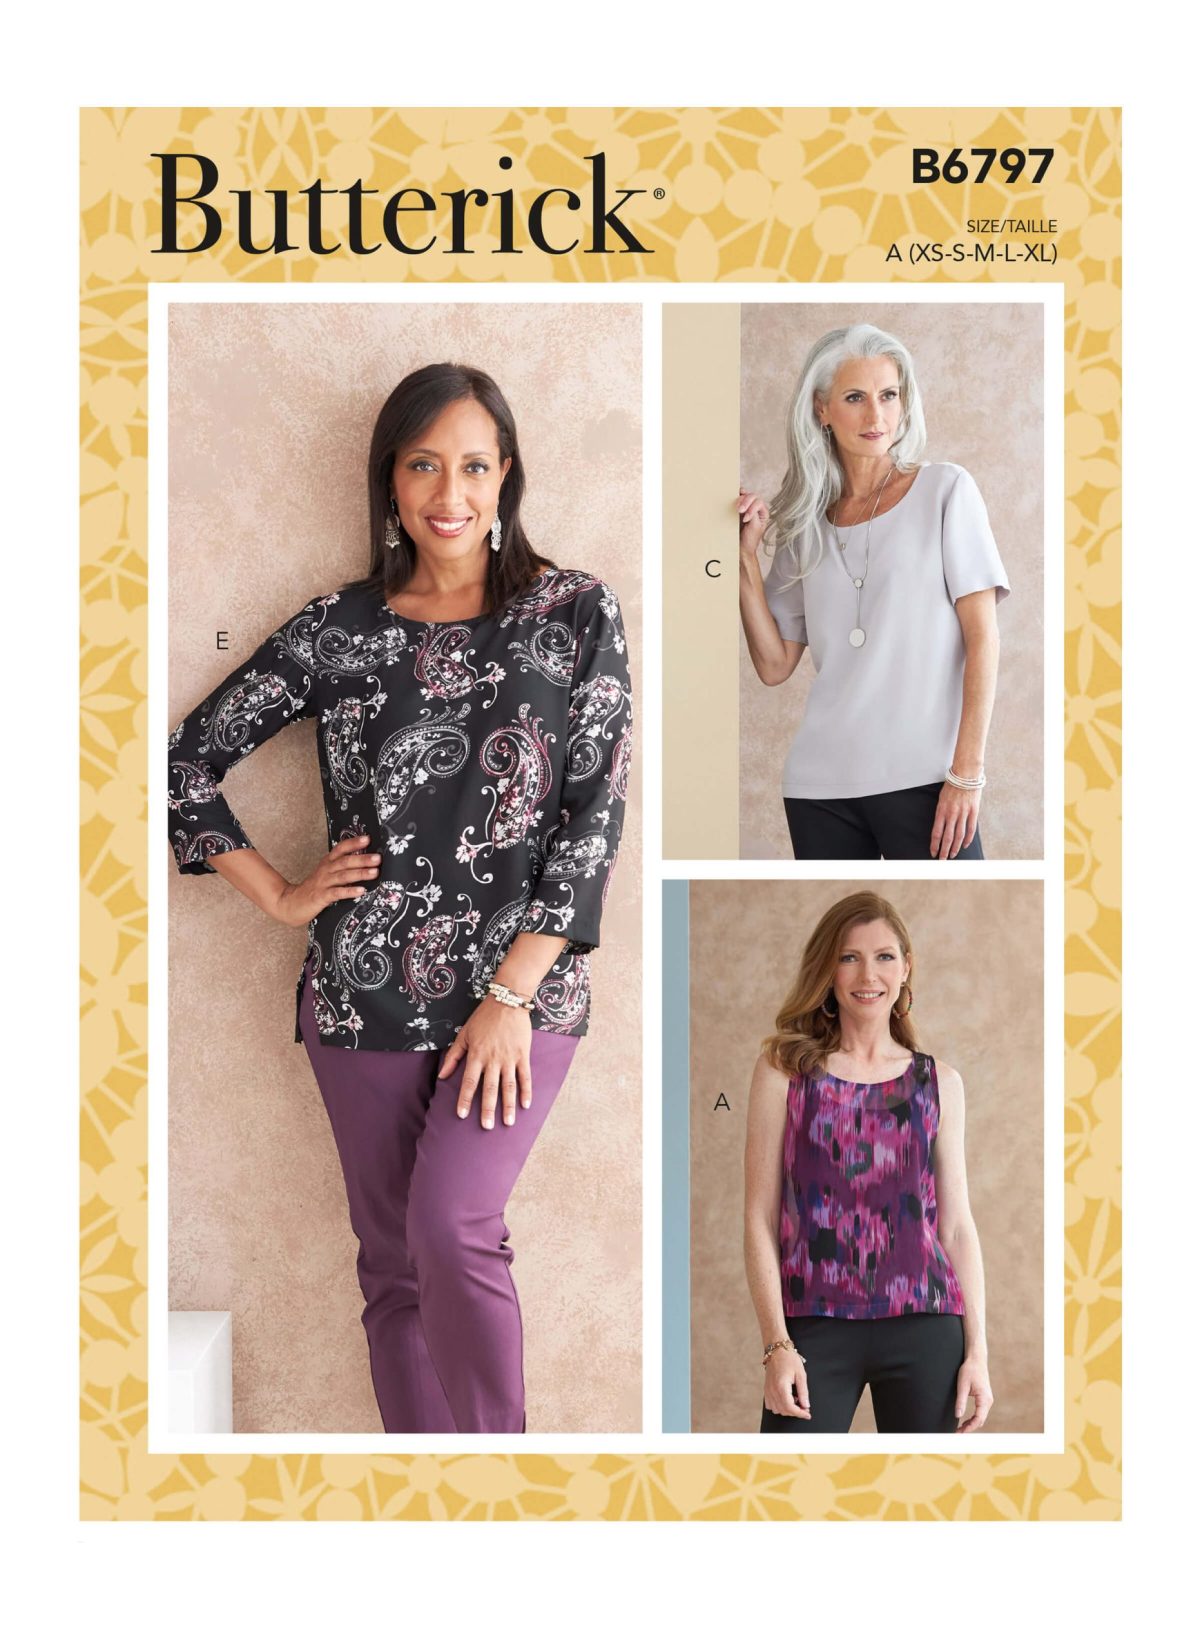 Butterick Sewing Pattern B6797 Misses' and Misses' Petite Tops with Scoop-neckline